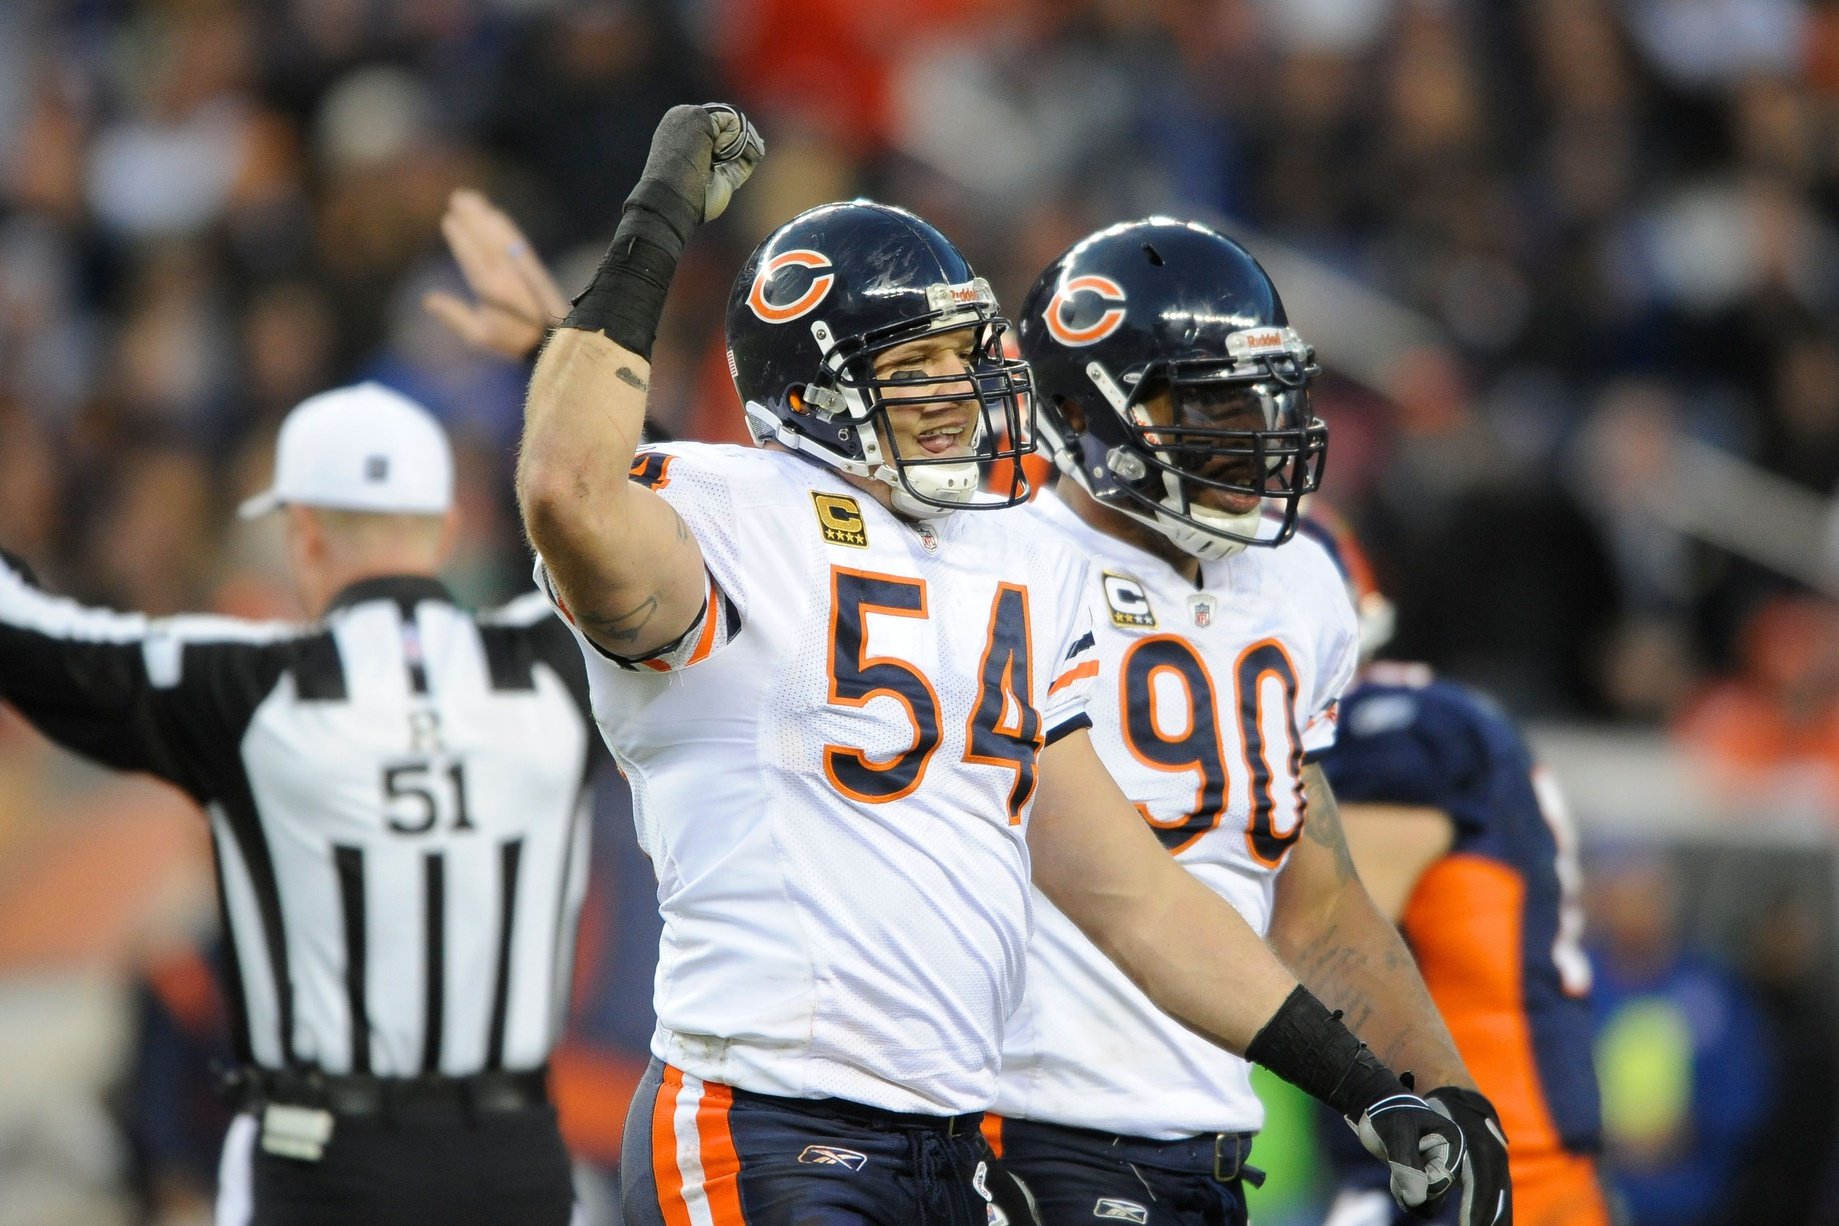 Brian Urlacher (54) reacts after the bears forced a turnover during the fourth quarter of the game against the Denver Broncos at Sports Authority Field.